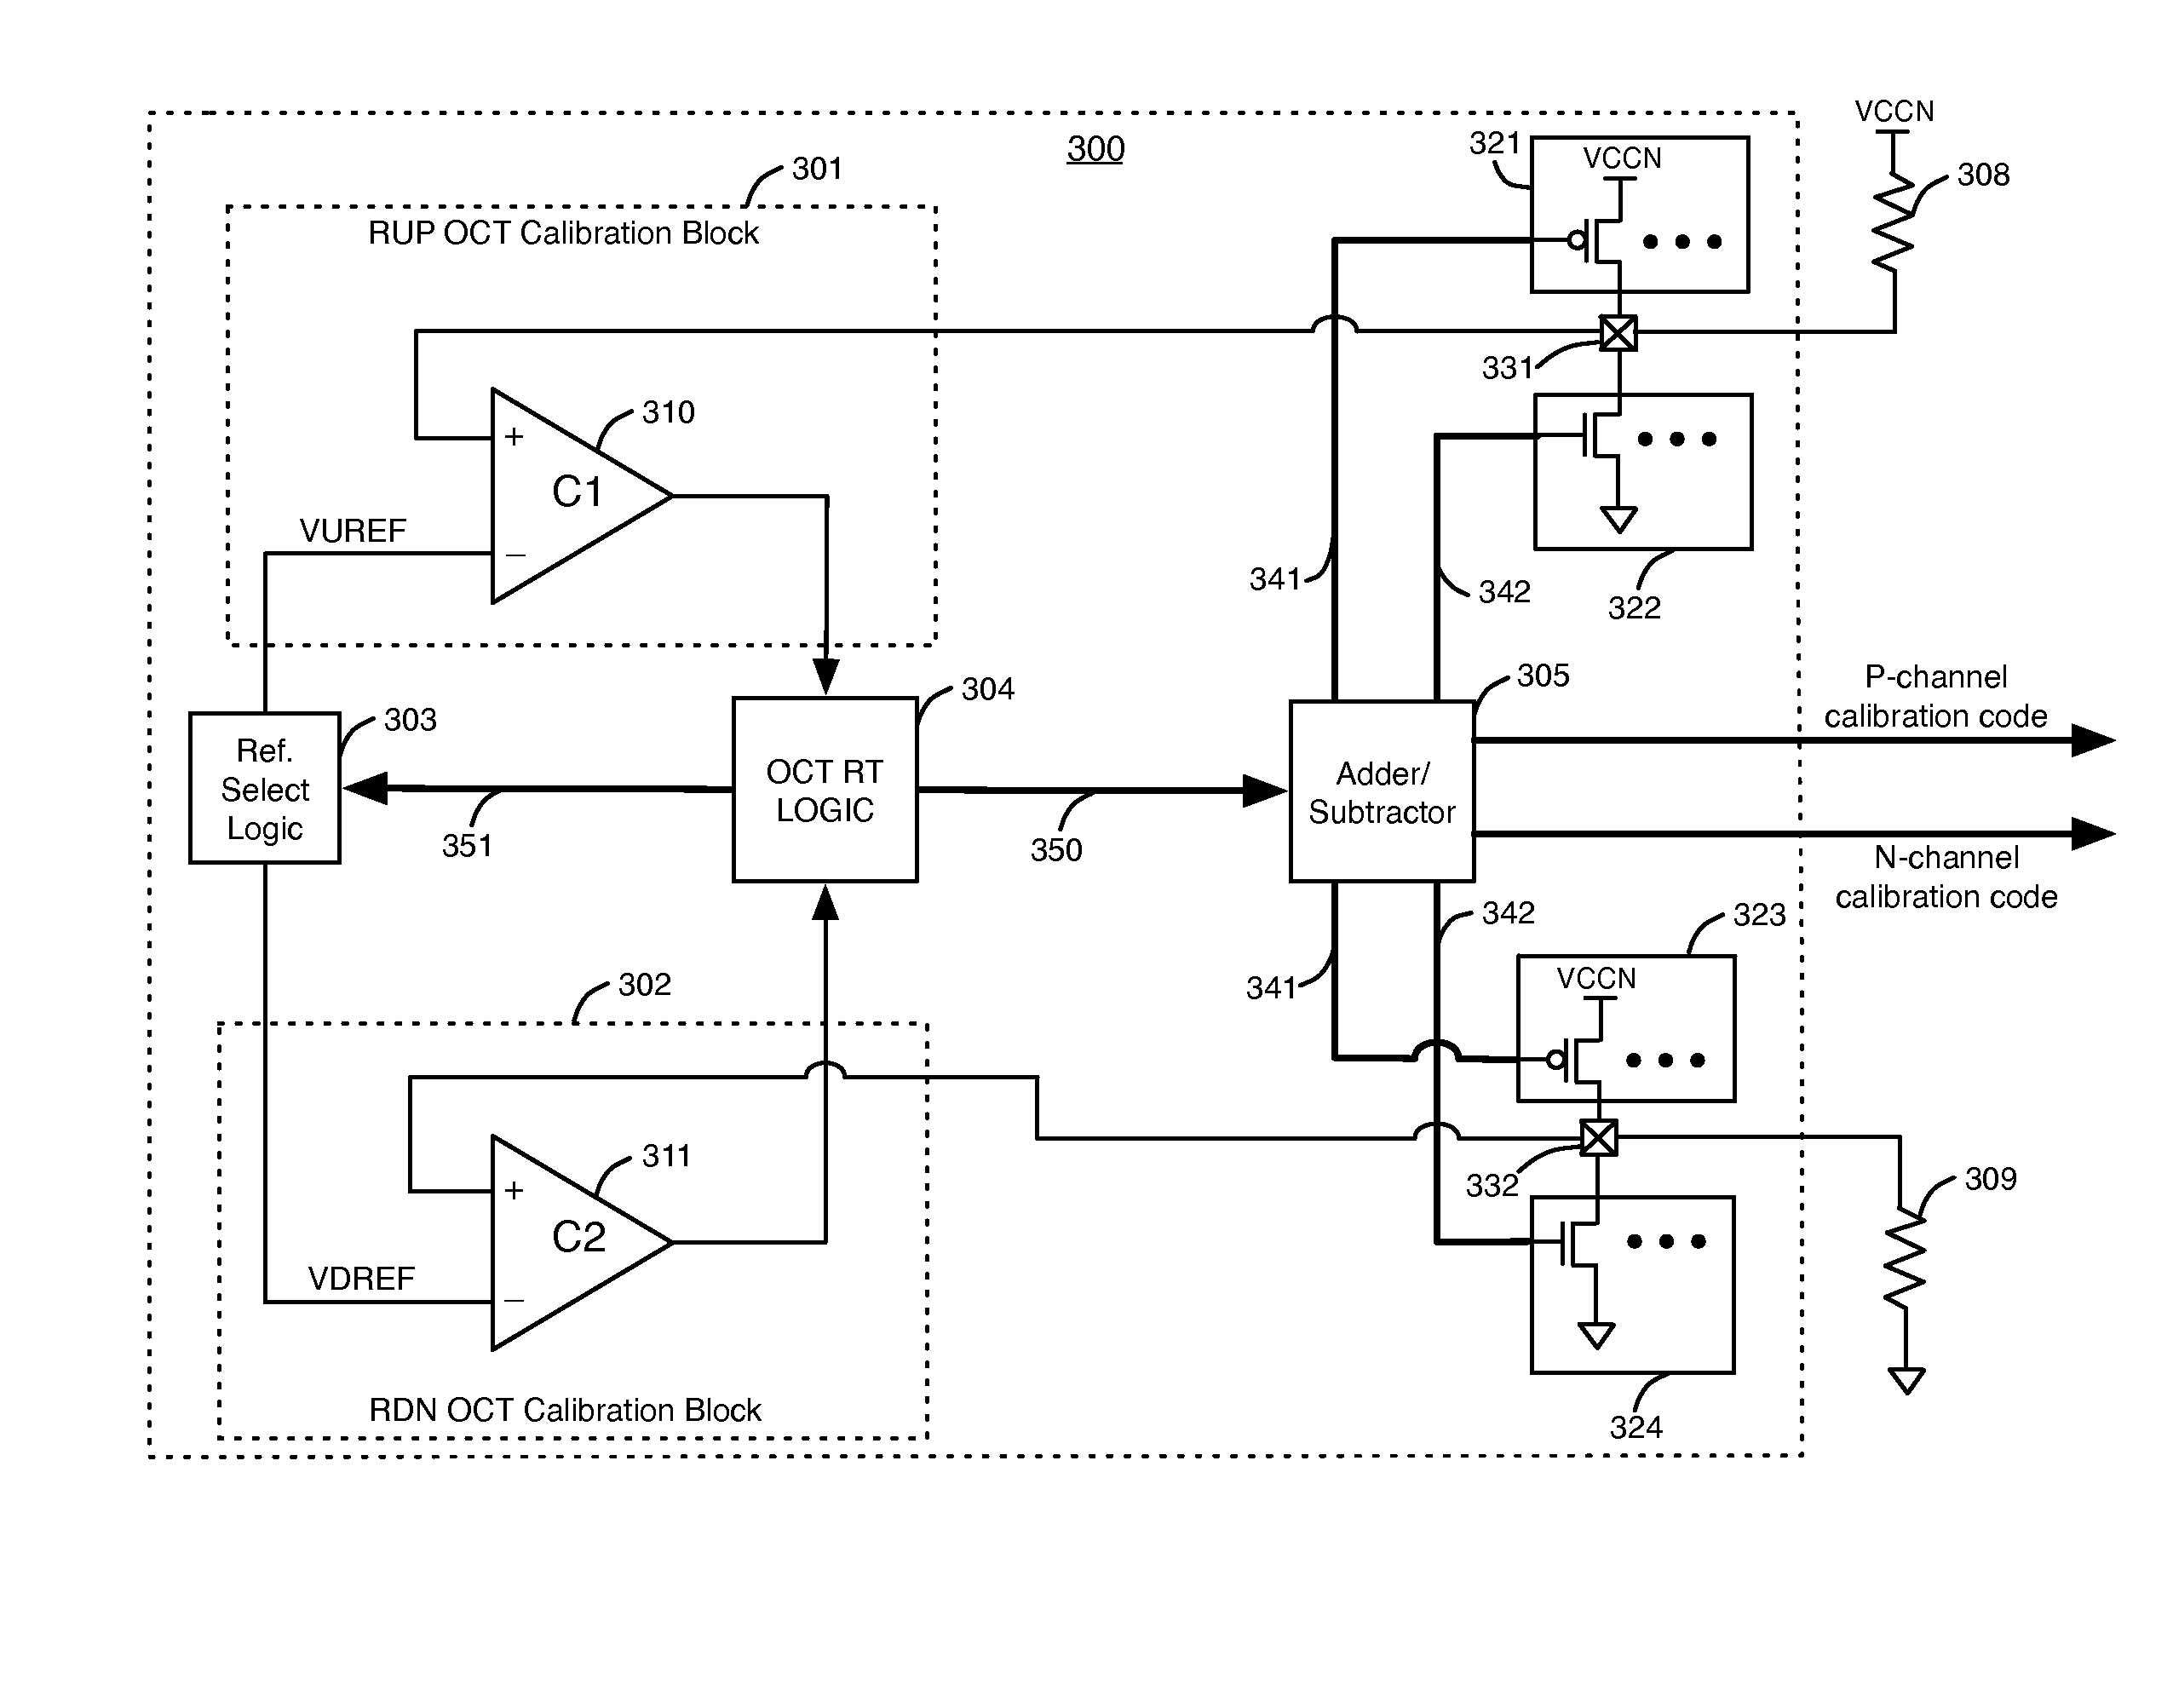 Techniques for providing calibrated parallel on-chip termination impedance